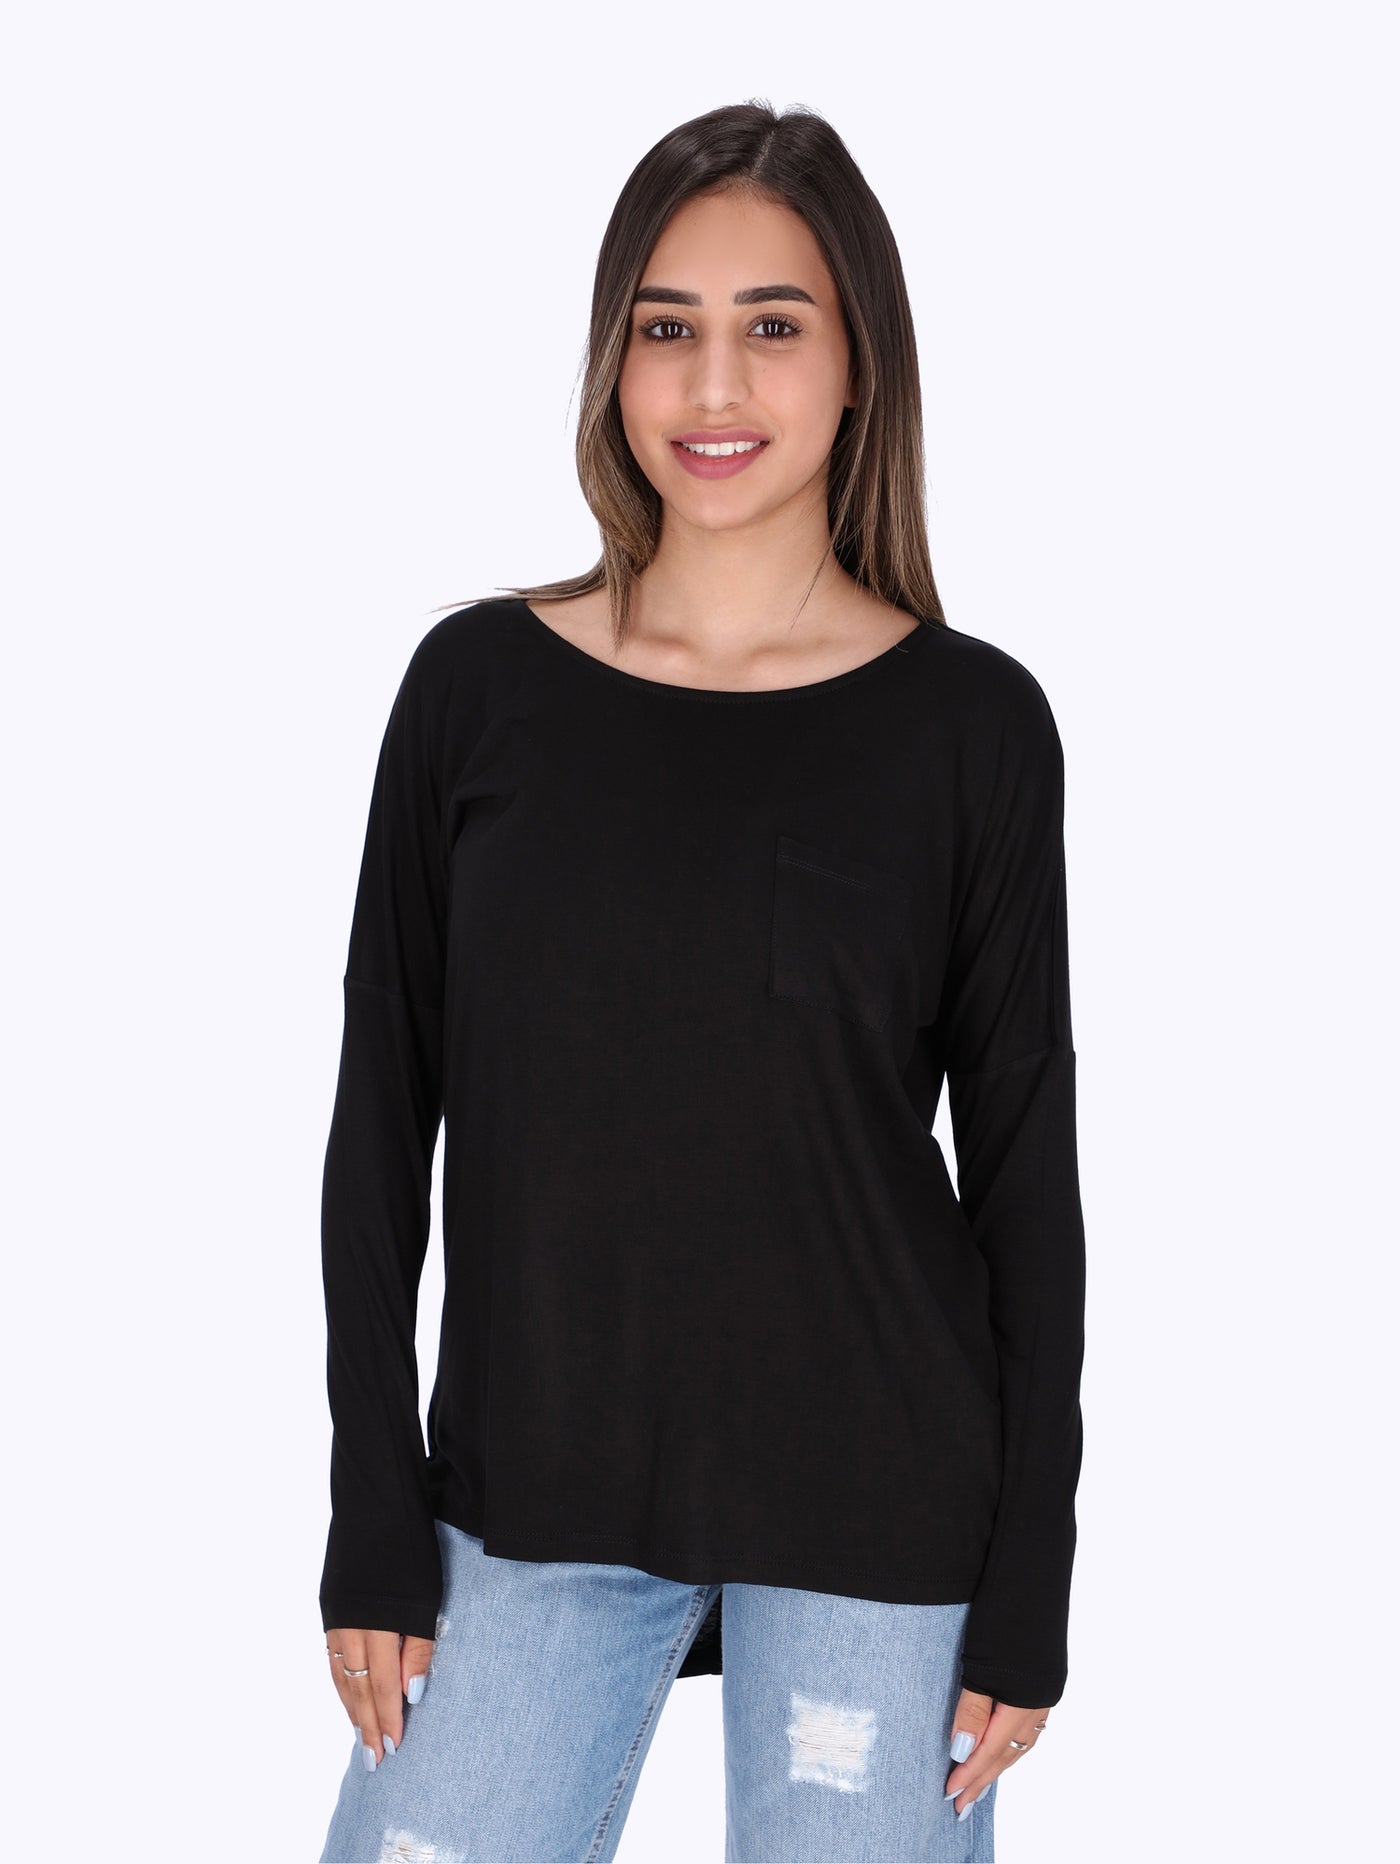 OR Women's High-Low Patch Pocket Top